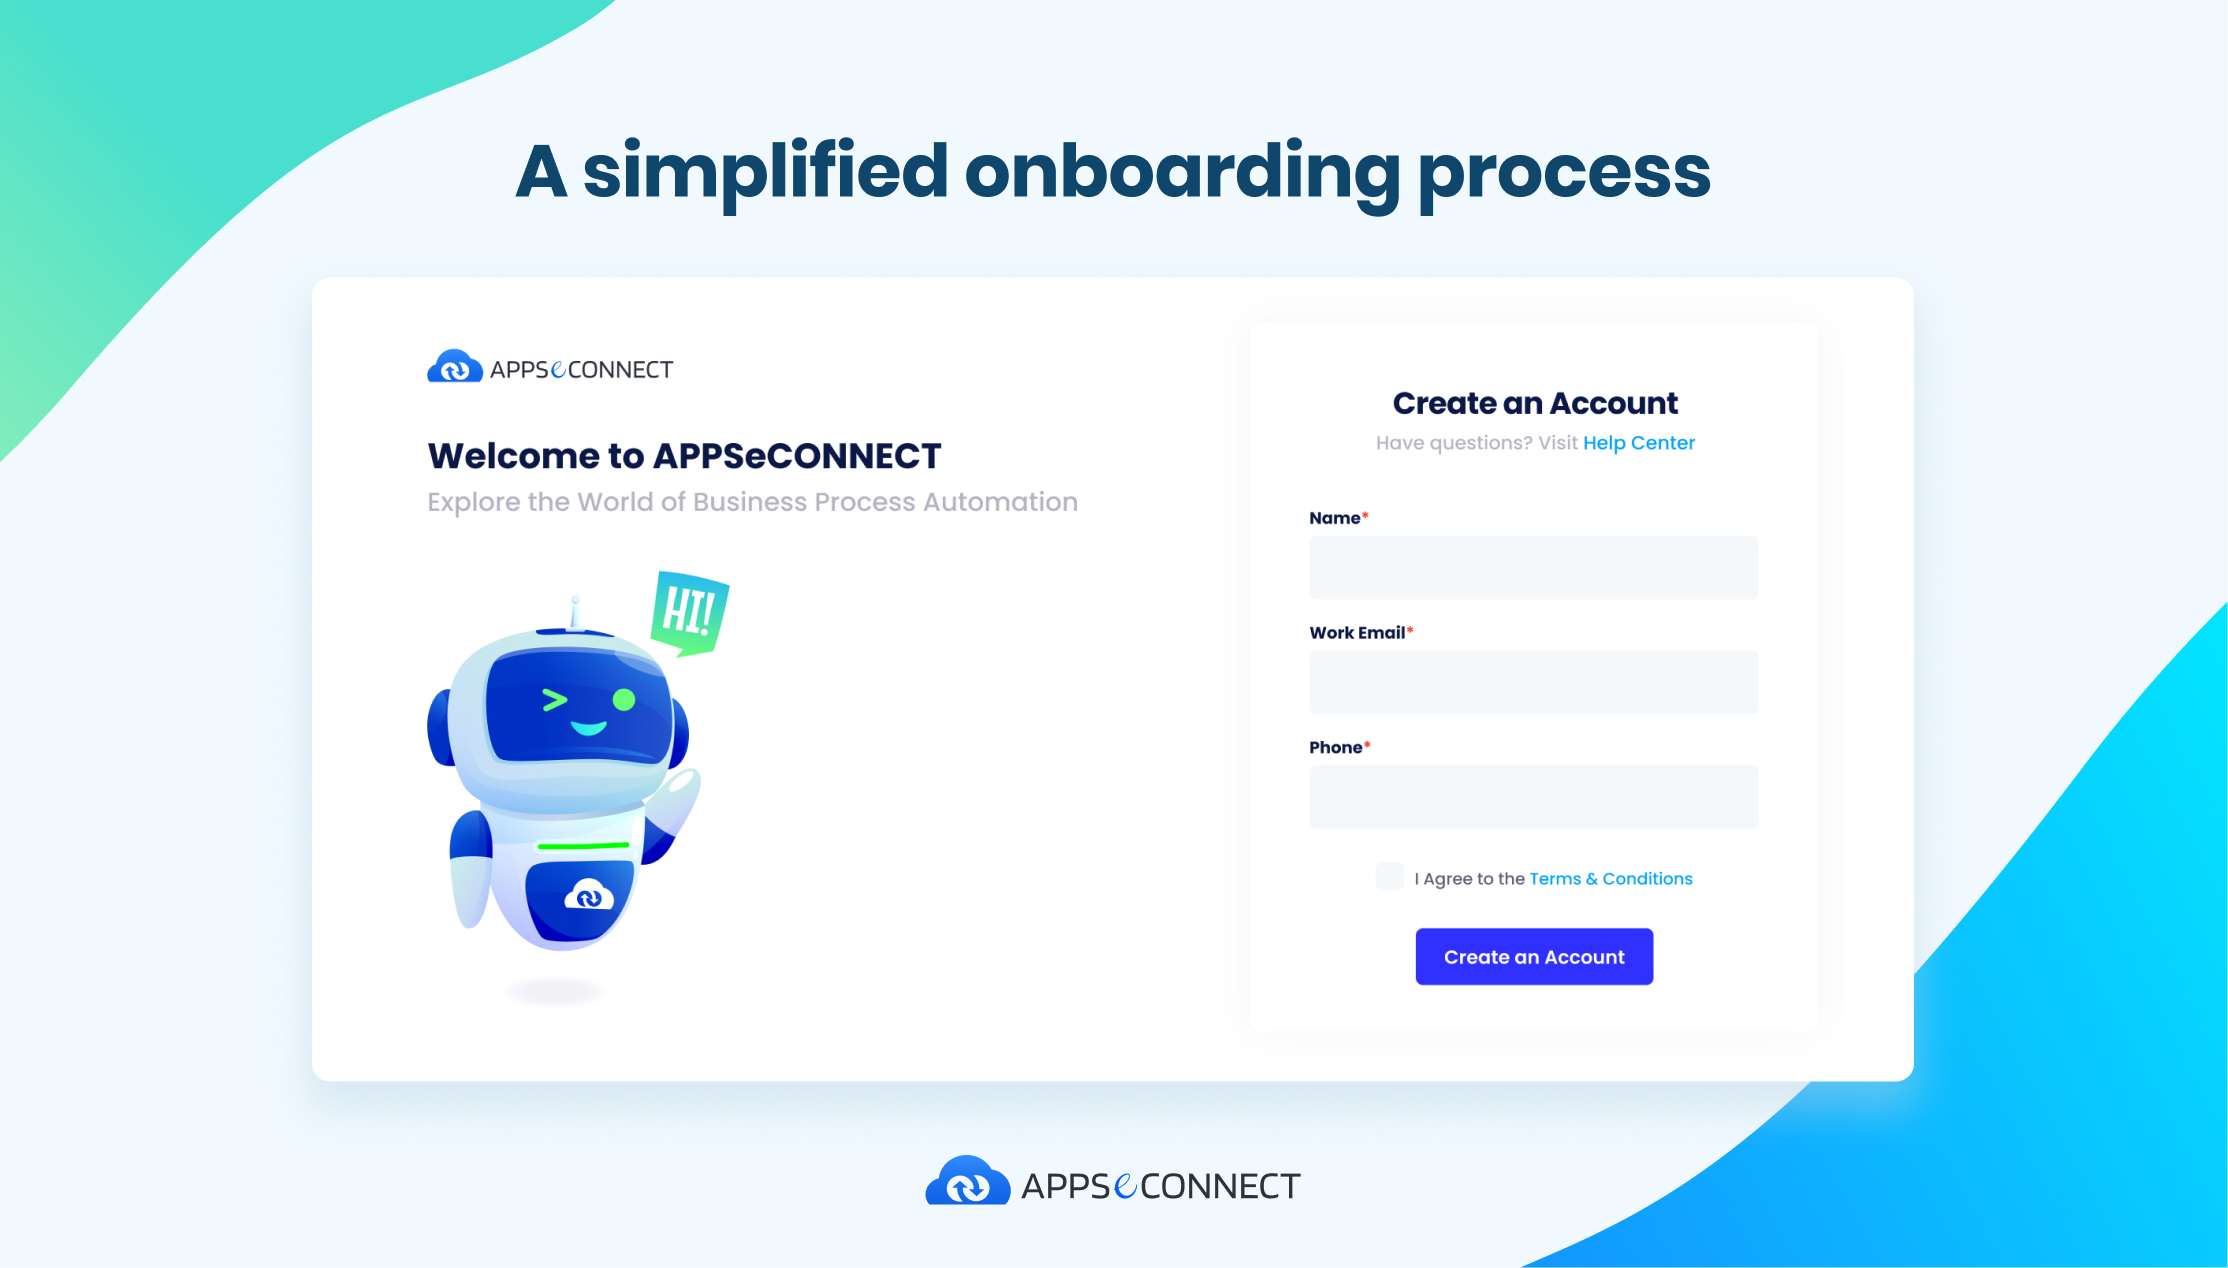 A simplified onboarding Process - Explore the World of Business Process Automation with APPSeCONNECT's simplified onboarding process.